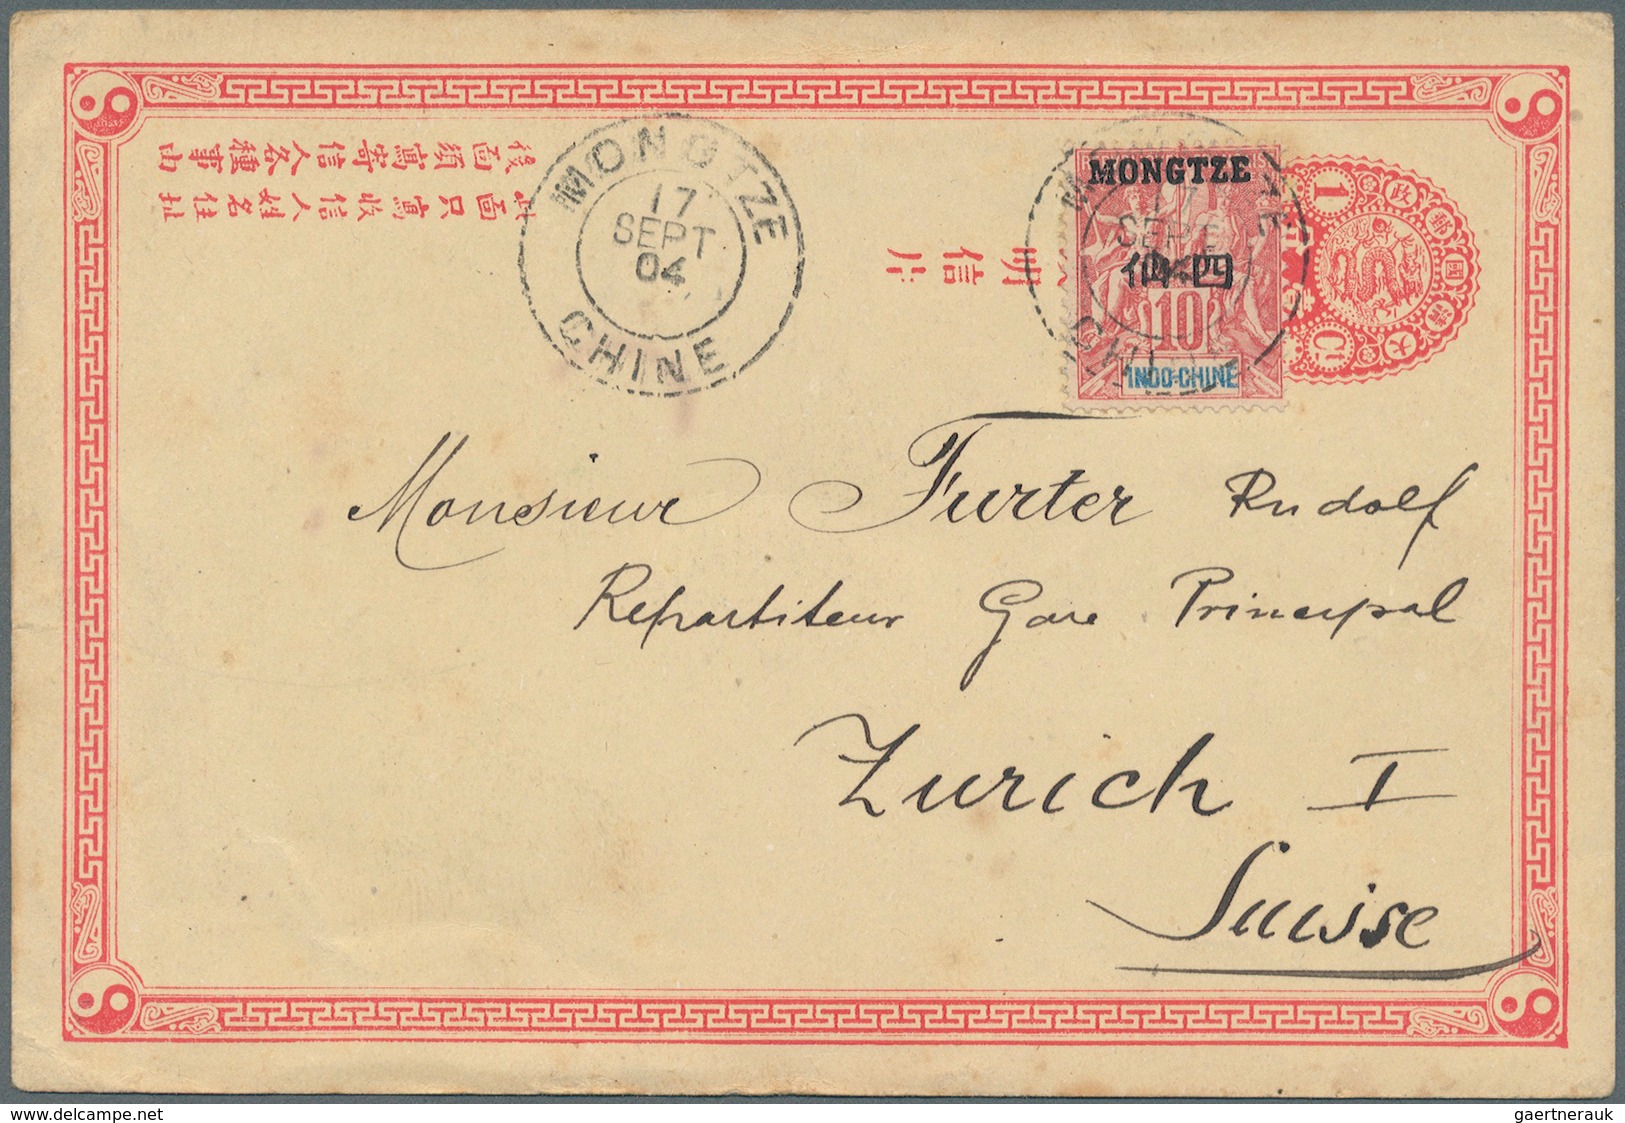 China - Ganzsachen: 1897, Card 1 C. ICP W. French Offices South China 4 F. / 10 C. "MONGTZE" Tied "M - Cartes Postales